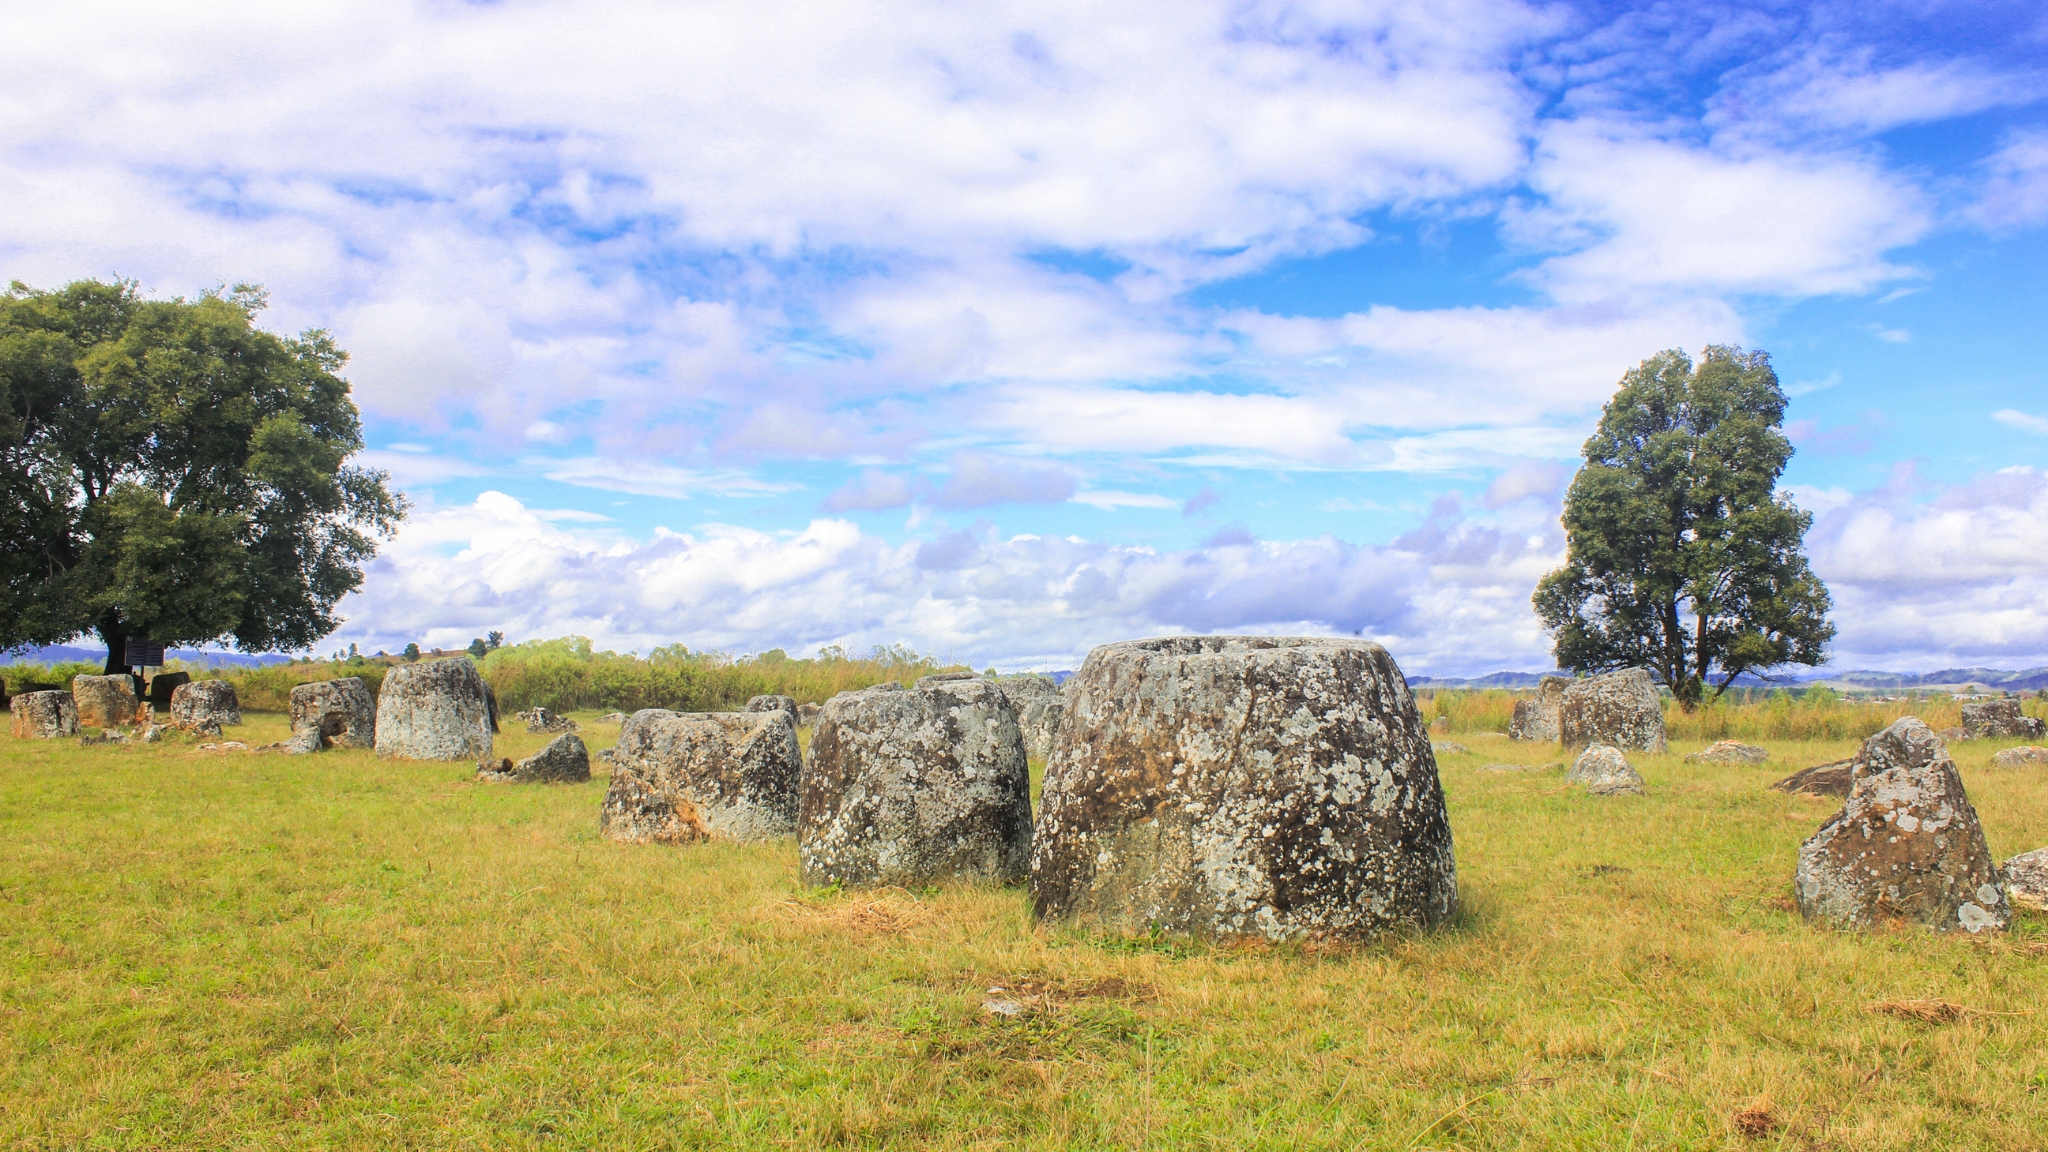 Day 12 Explore The Stone Wonders In Plain Of Jars